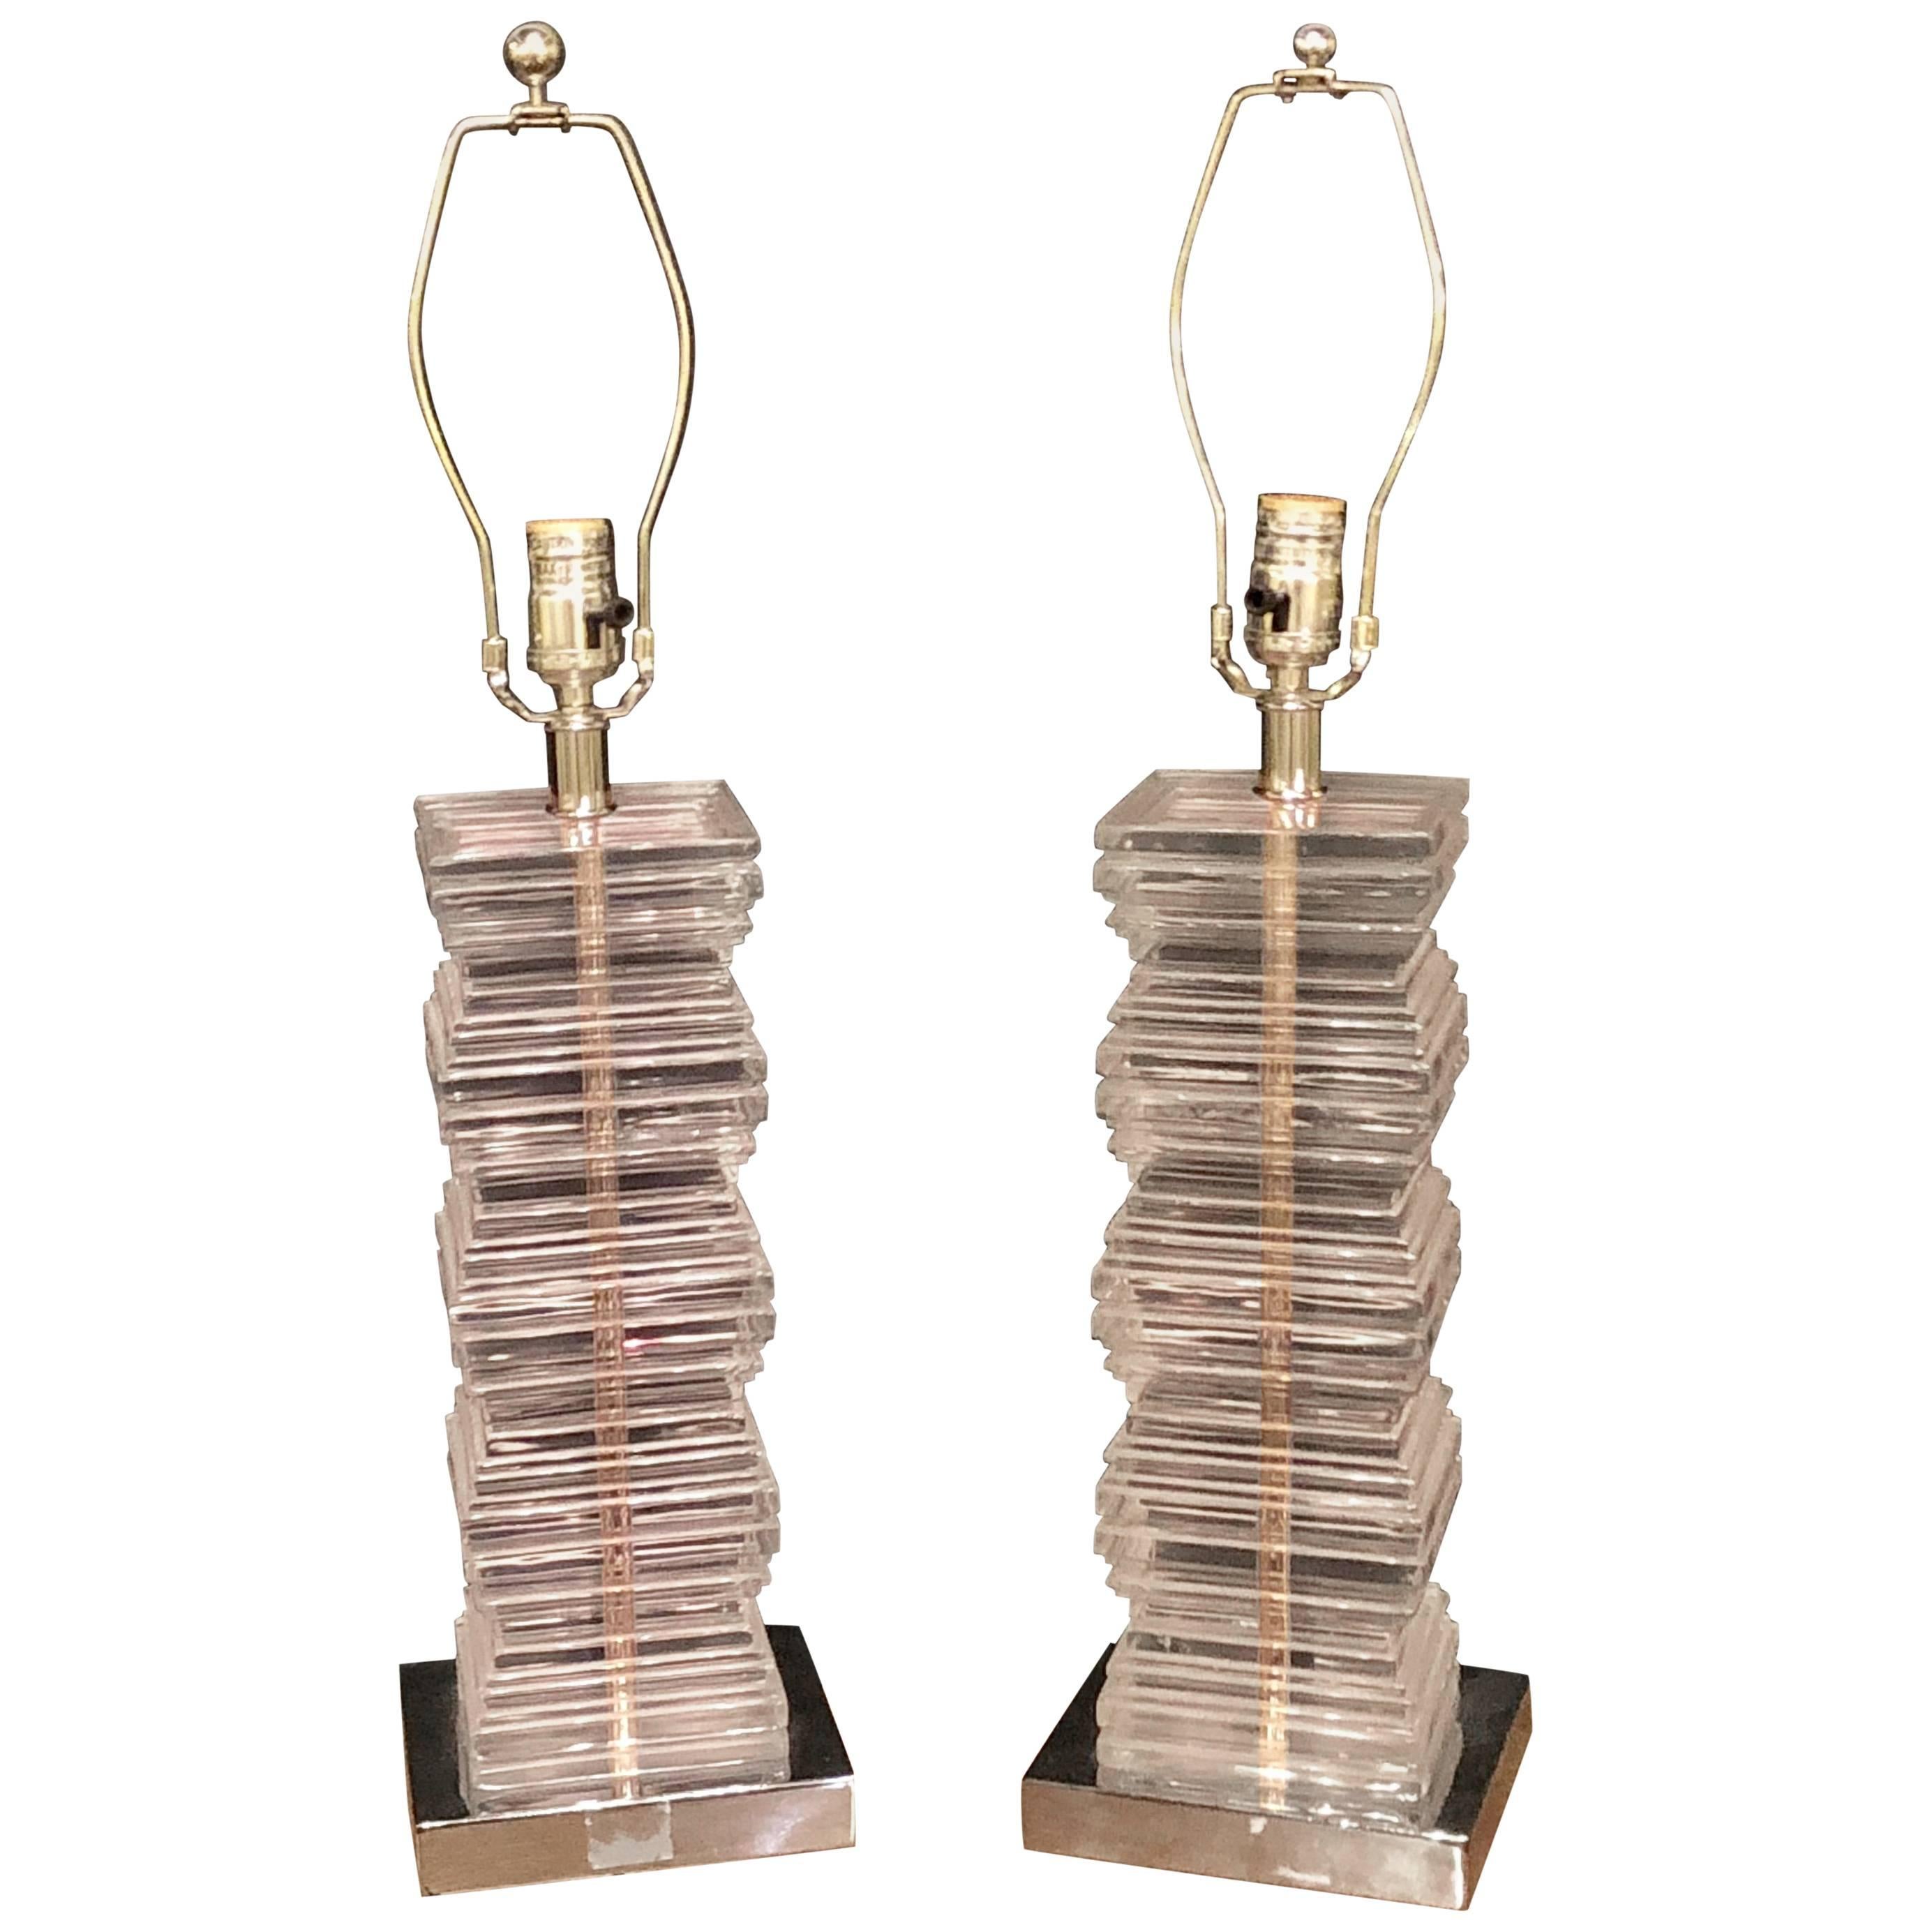 Pair of Lucite Stacked Art Deco Style Table Lamps